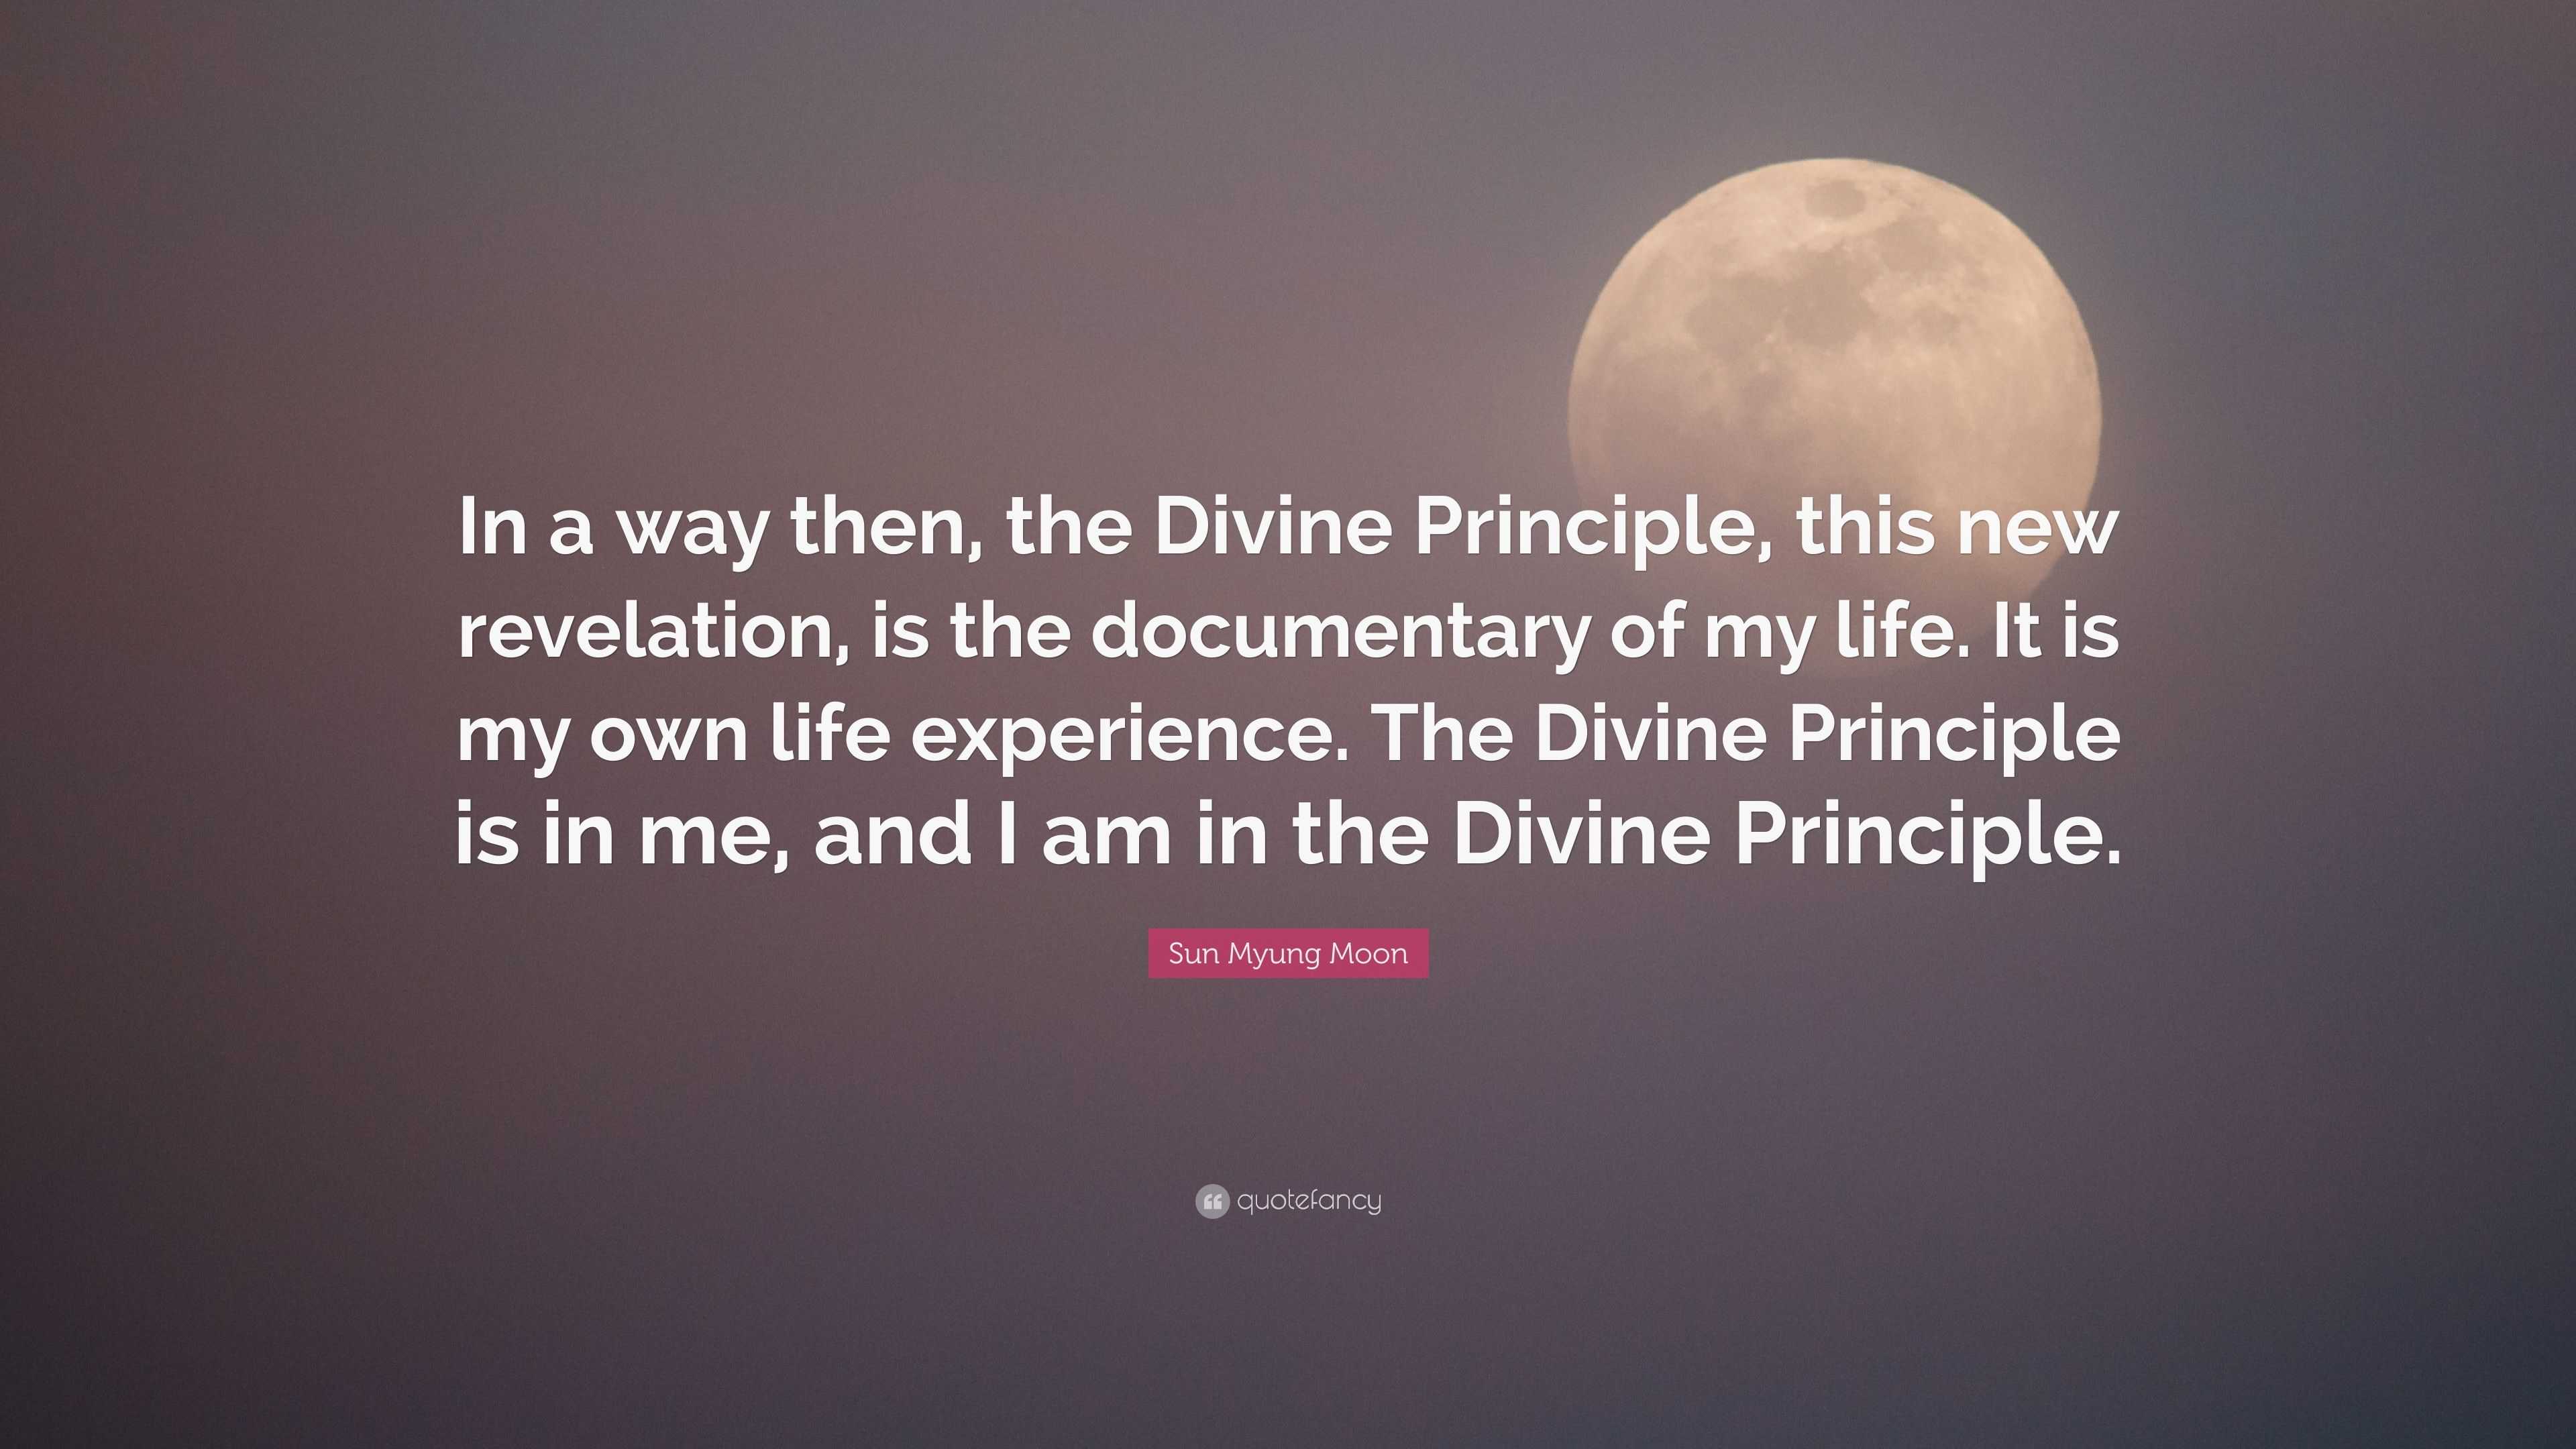 Sun Myung Moon Quote In A Way Then The Divine Principle This New Revelation Is The Documentary Of My Life It Is My Own Life Experience T